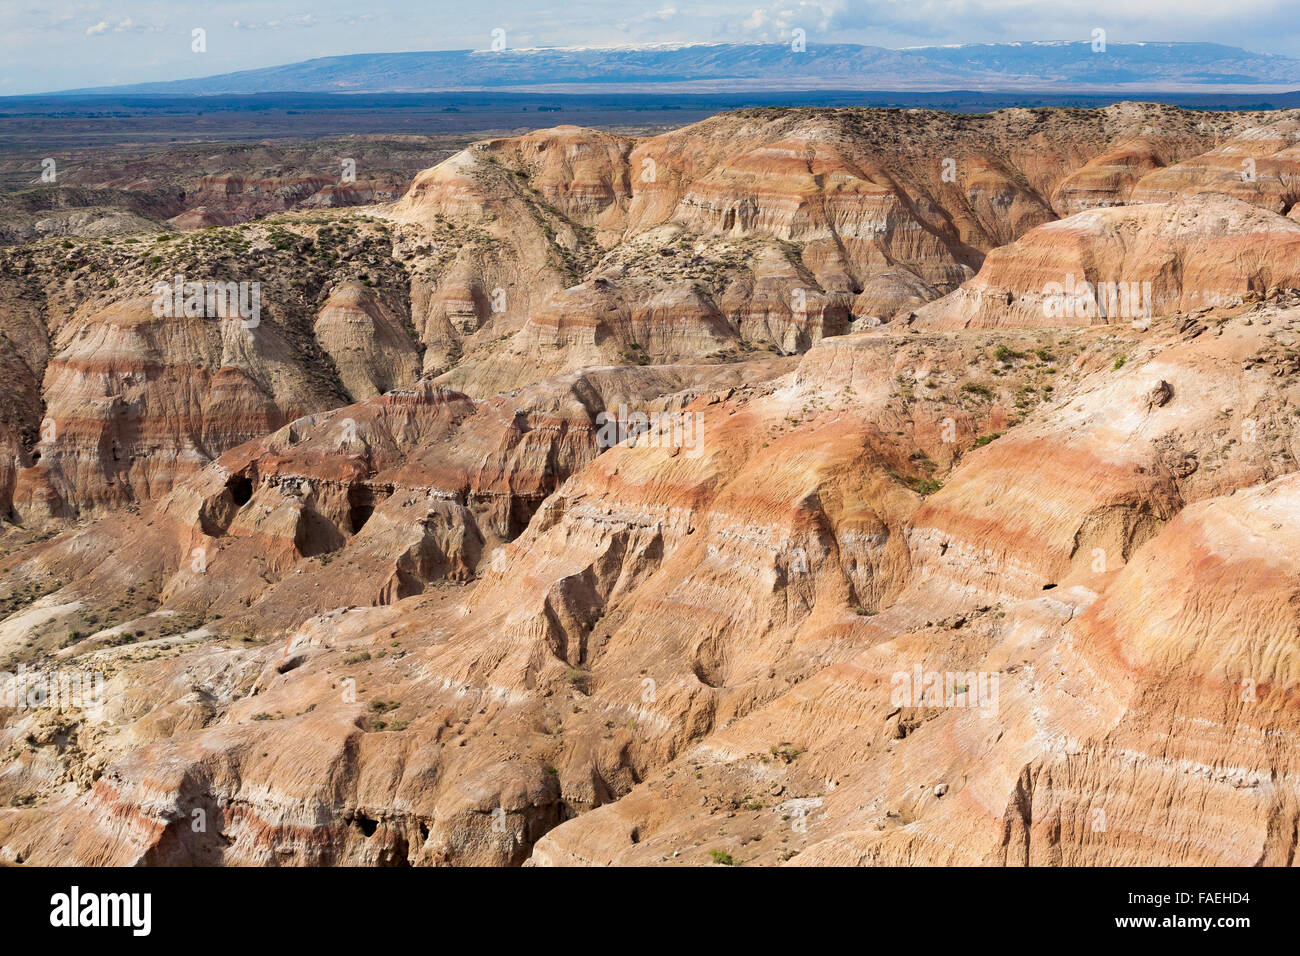 The Bighorn Mountains rise behind the badlands of the Bighorn Basin in north-central Wyoming. Stock Photo